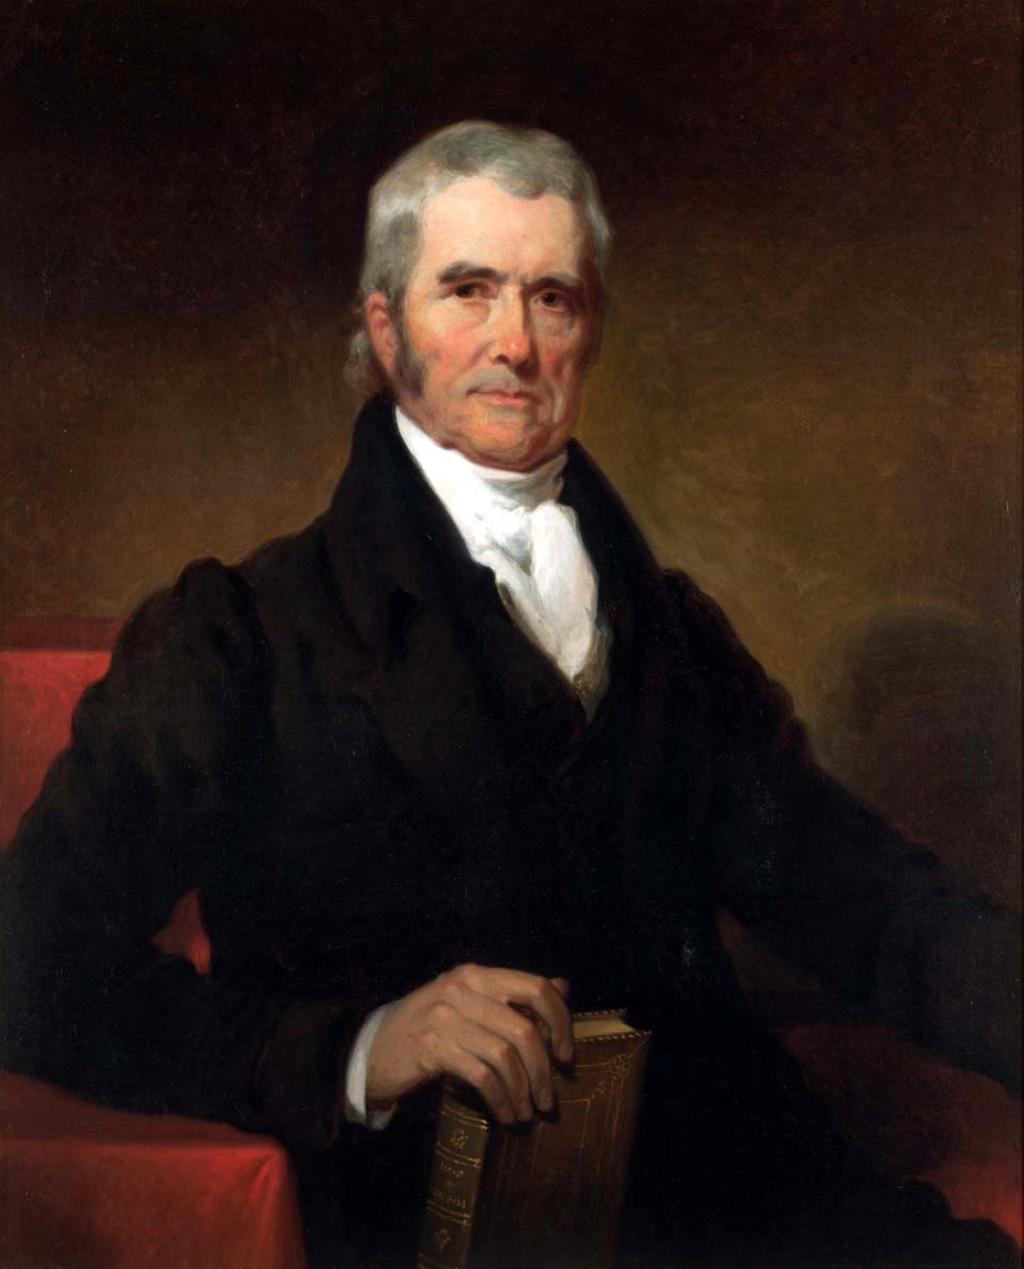 WHO WAS JOHN MARSHALL? First important Chief Justice of the United States (beginning in 1801). He wrote many of the Supreme Court's first famous opinions, including Marbury v. Madison, McCulloch v.